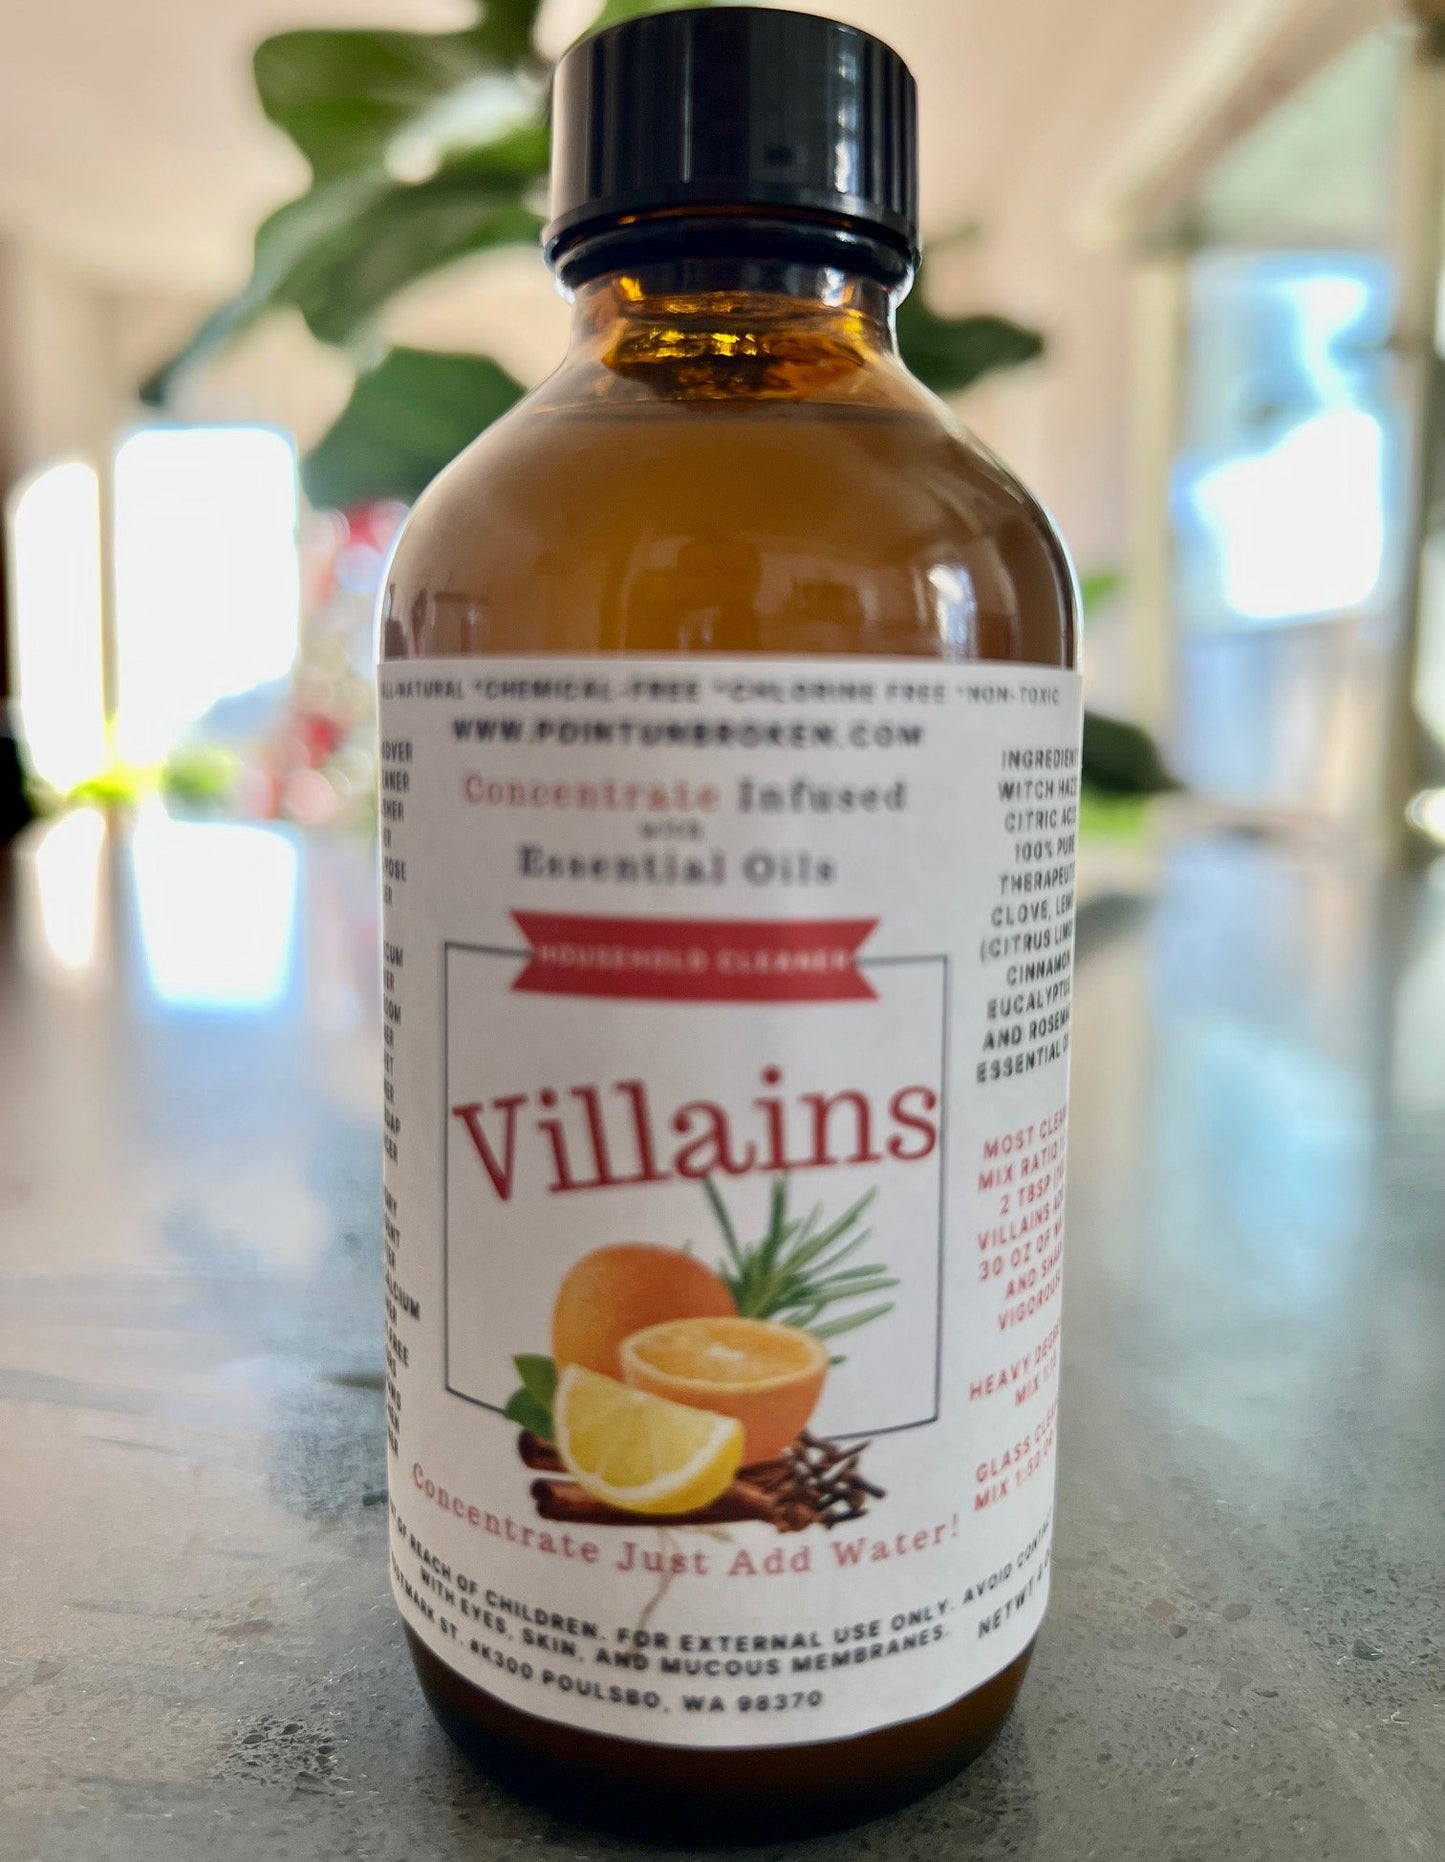 Villains 1:30 Concentrate All Purpose Household Cleaner